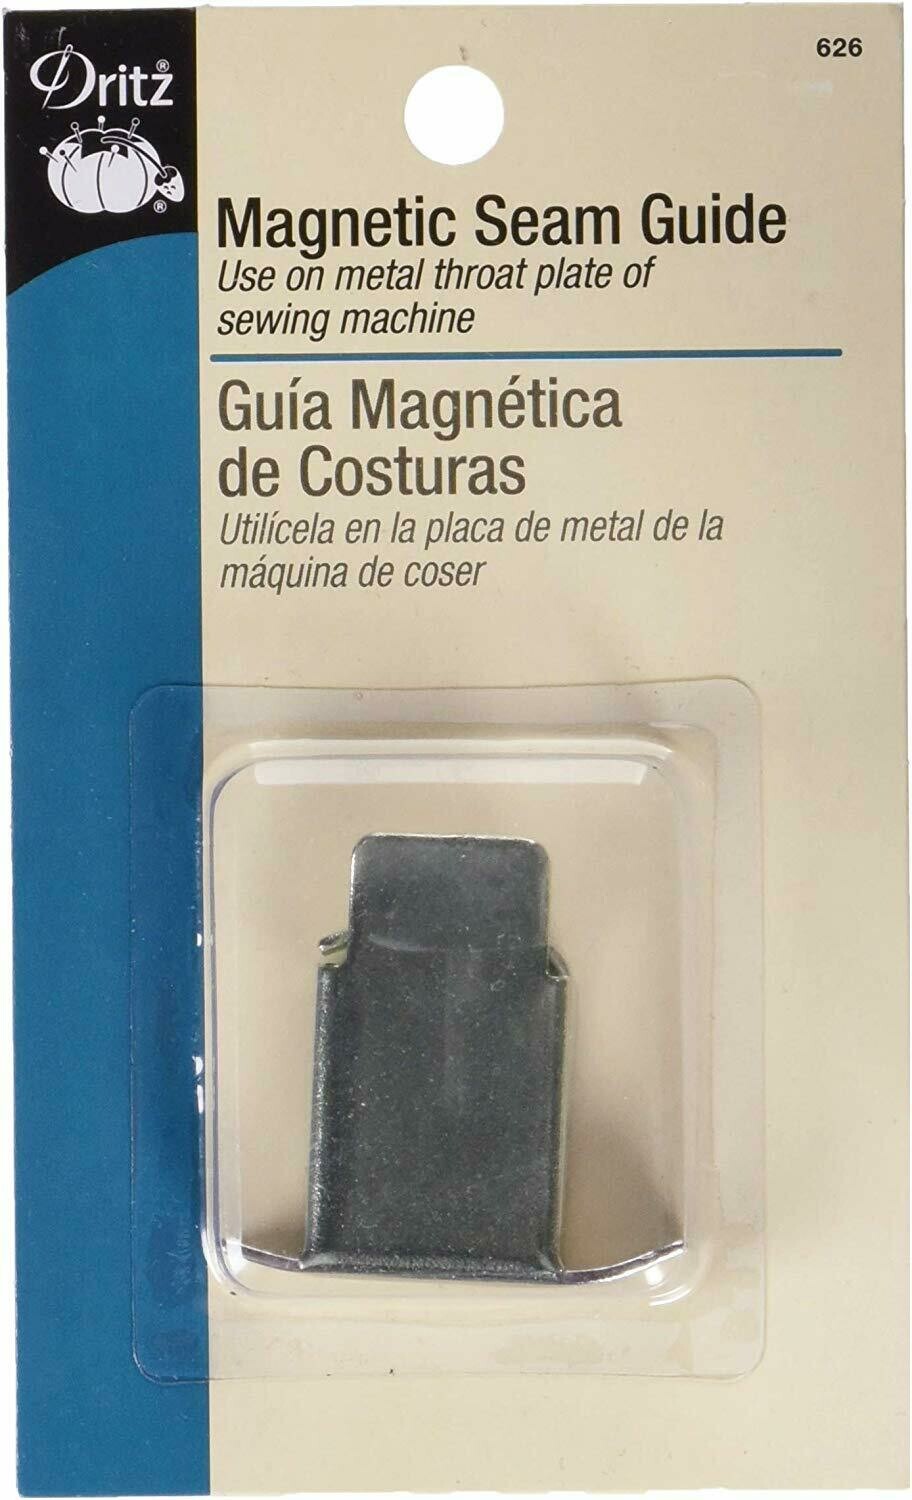 Magnetic Seam Guide,Magnetic Seam Guide for Sewing Machine